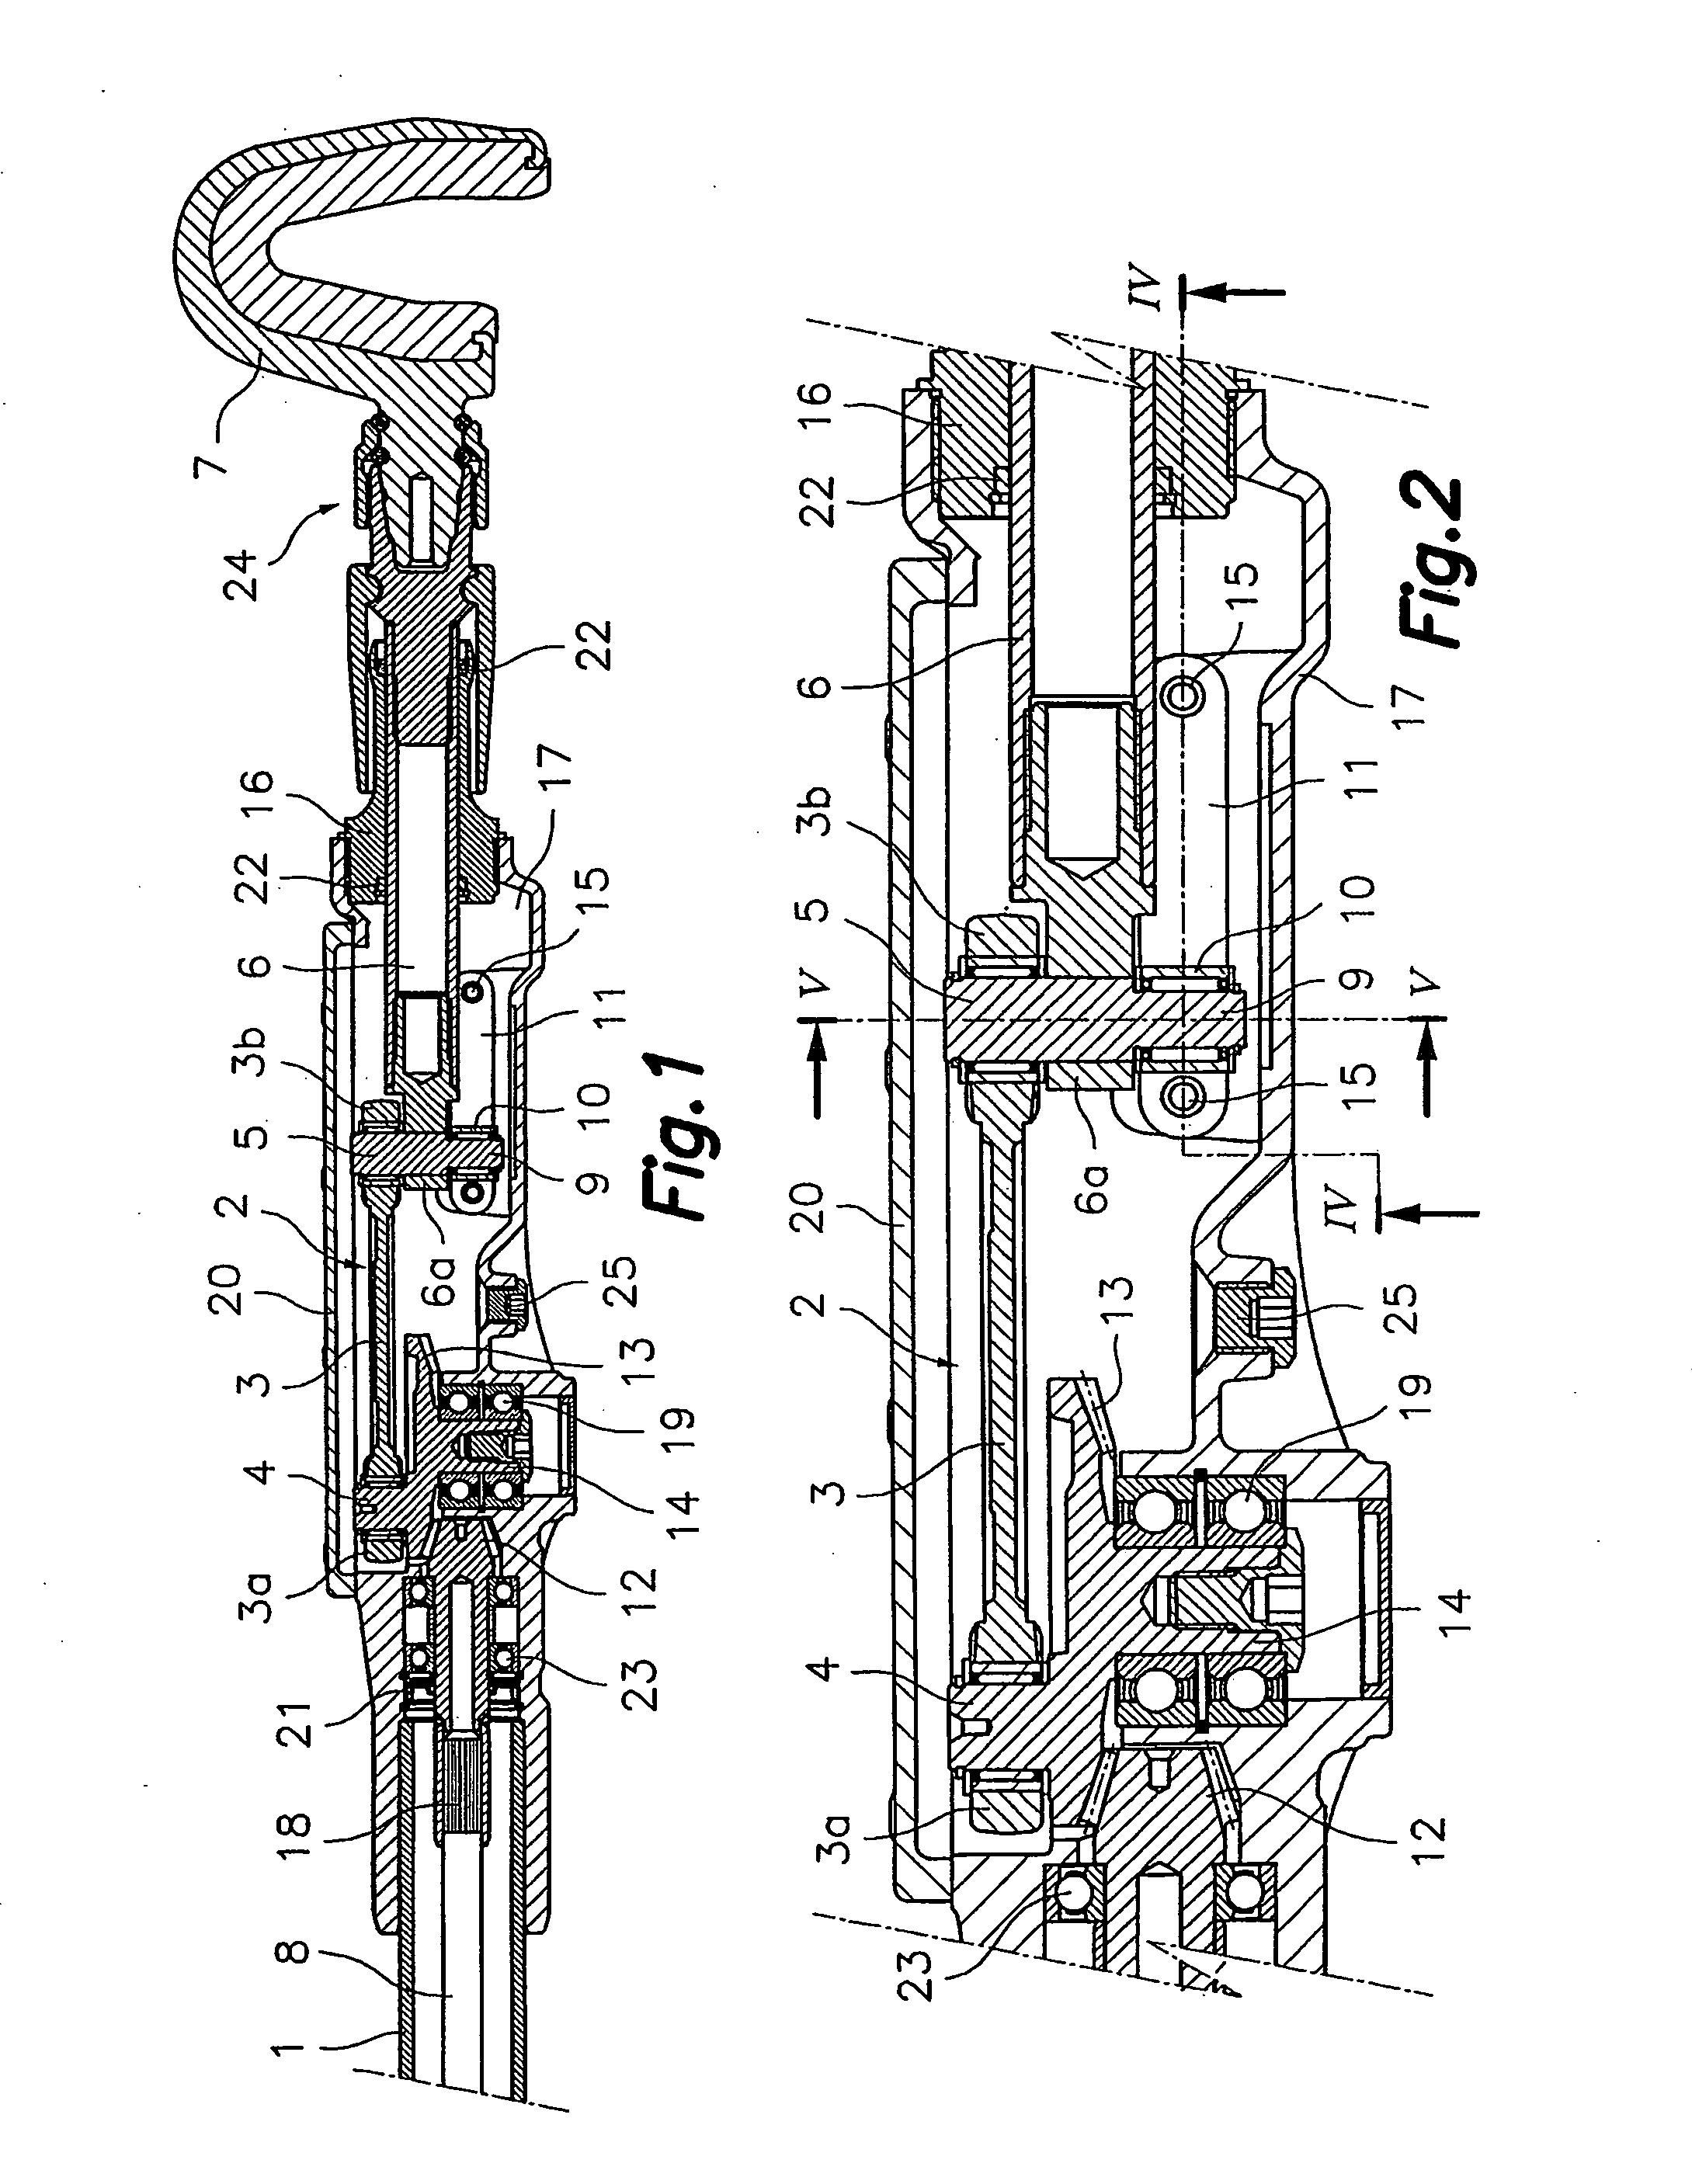 Torque-limiting device in a mechanism used to transform a rotational movement into a reciprocating linear movement or vice versa